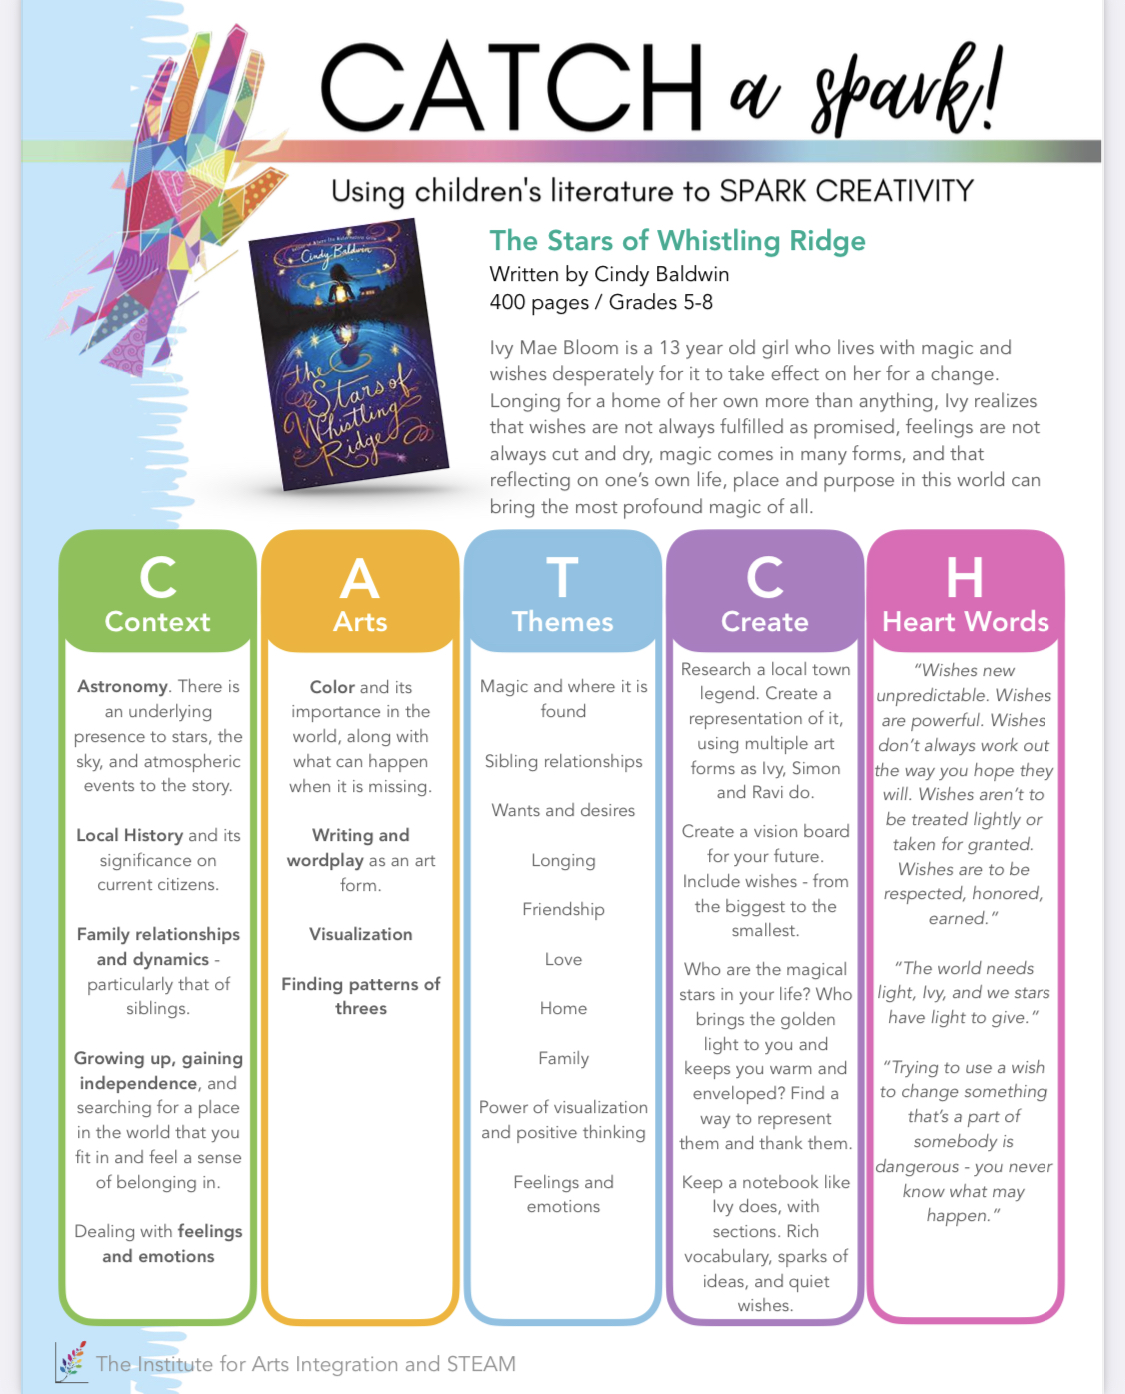 Activity Guide by the Institute of Arts Integration and STEAM